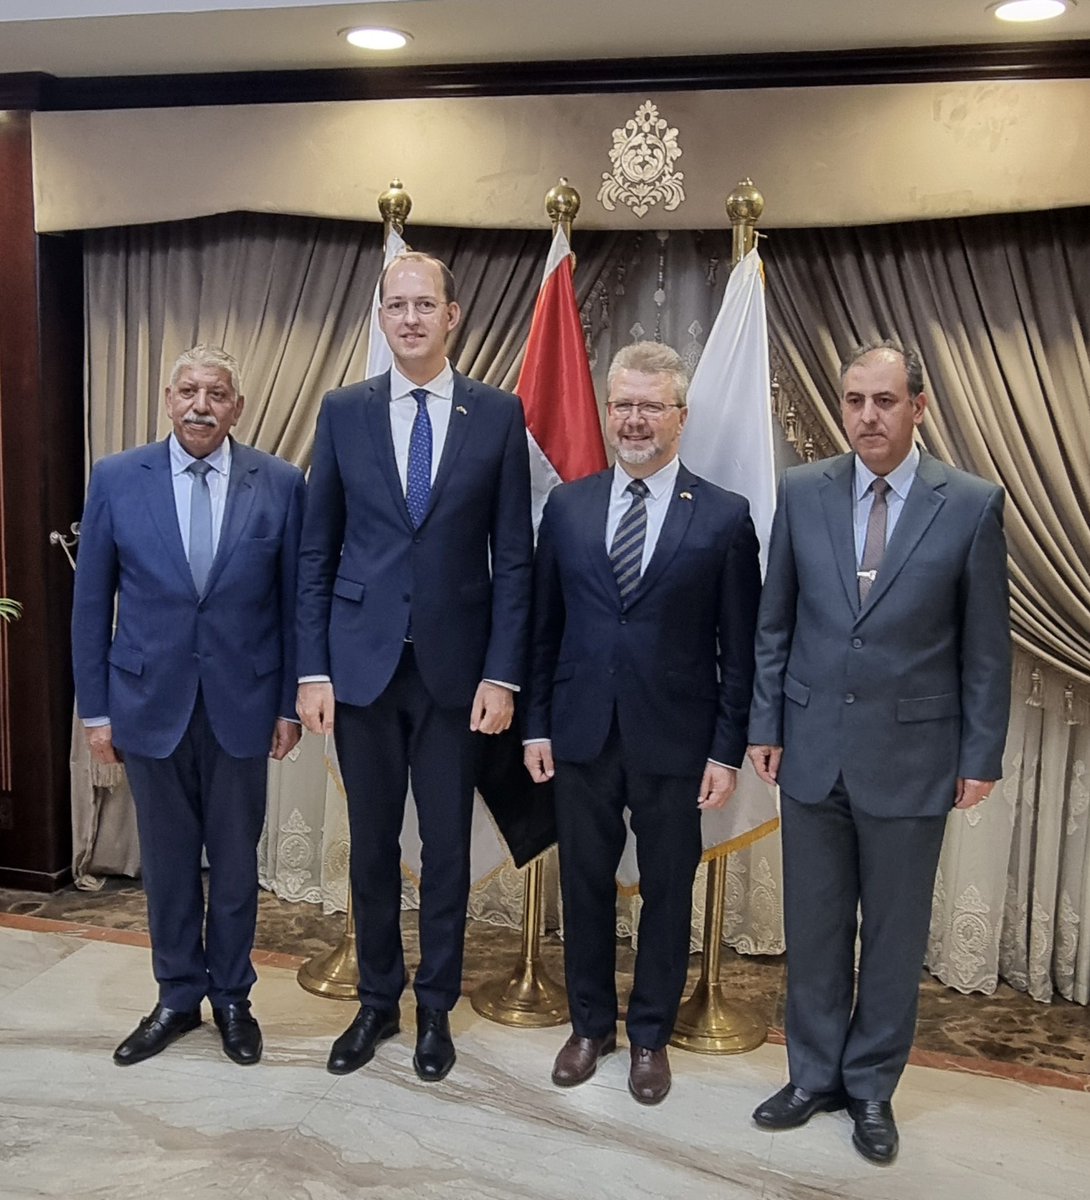 Thankful for the warm hospitality of @AlexandriaPort during our visit in 🇪🇬 #Alexandria. Had a timely discussion on 🇱🇹🇪🇬 cooperation opportunities through #Lithuania’s Port of #Klaipeda & our shared strive for safer, more effective & sustainable global maritime transport.